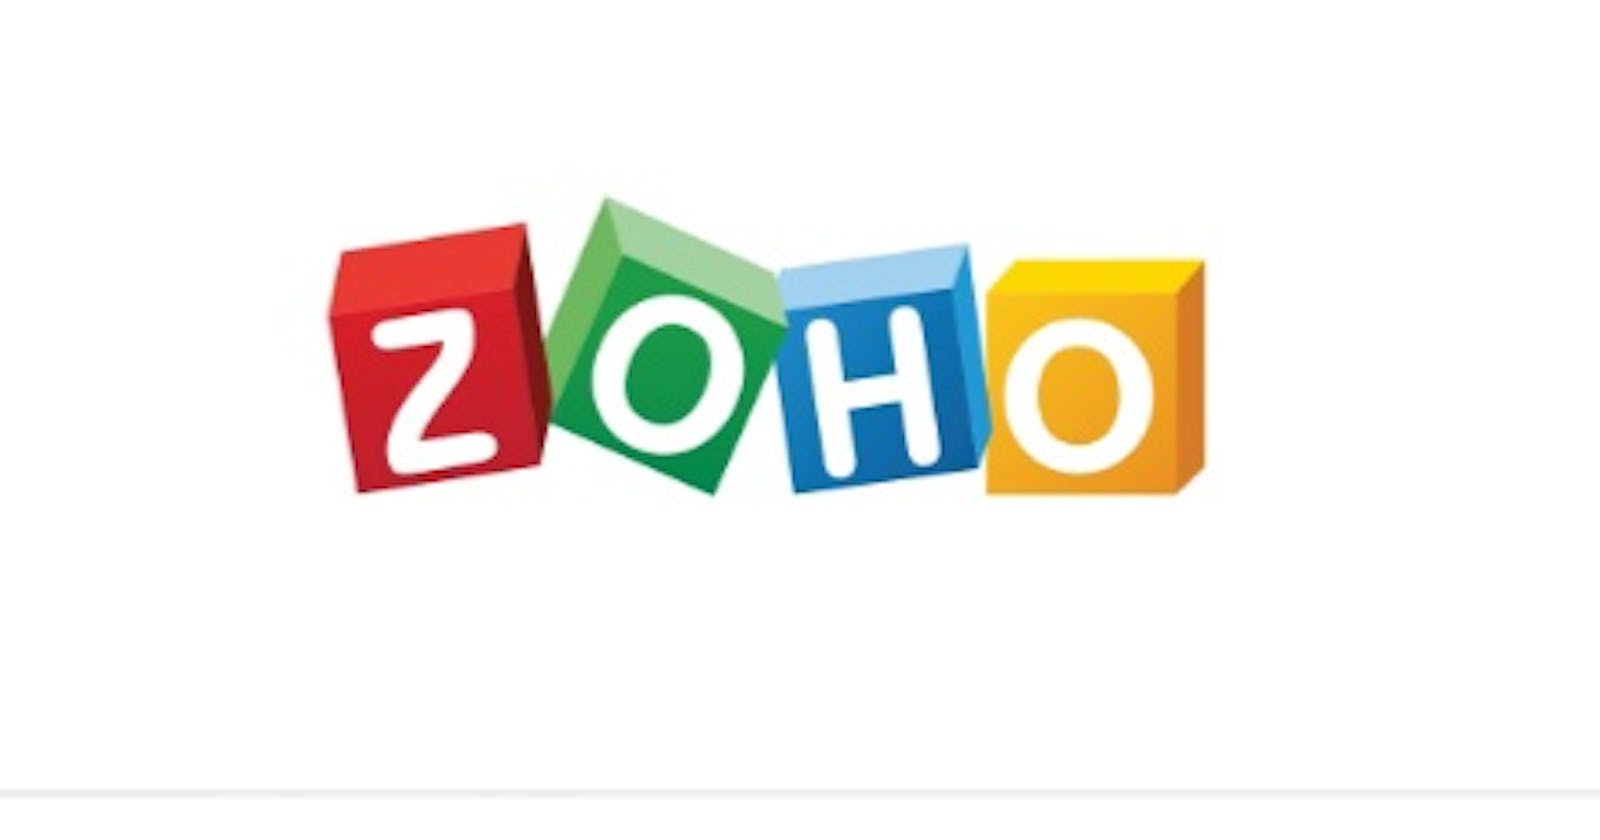 Process step on creating and activating the use of Zoho Mobile CRM tools for HB Beauty Company.